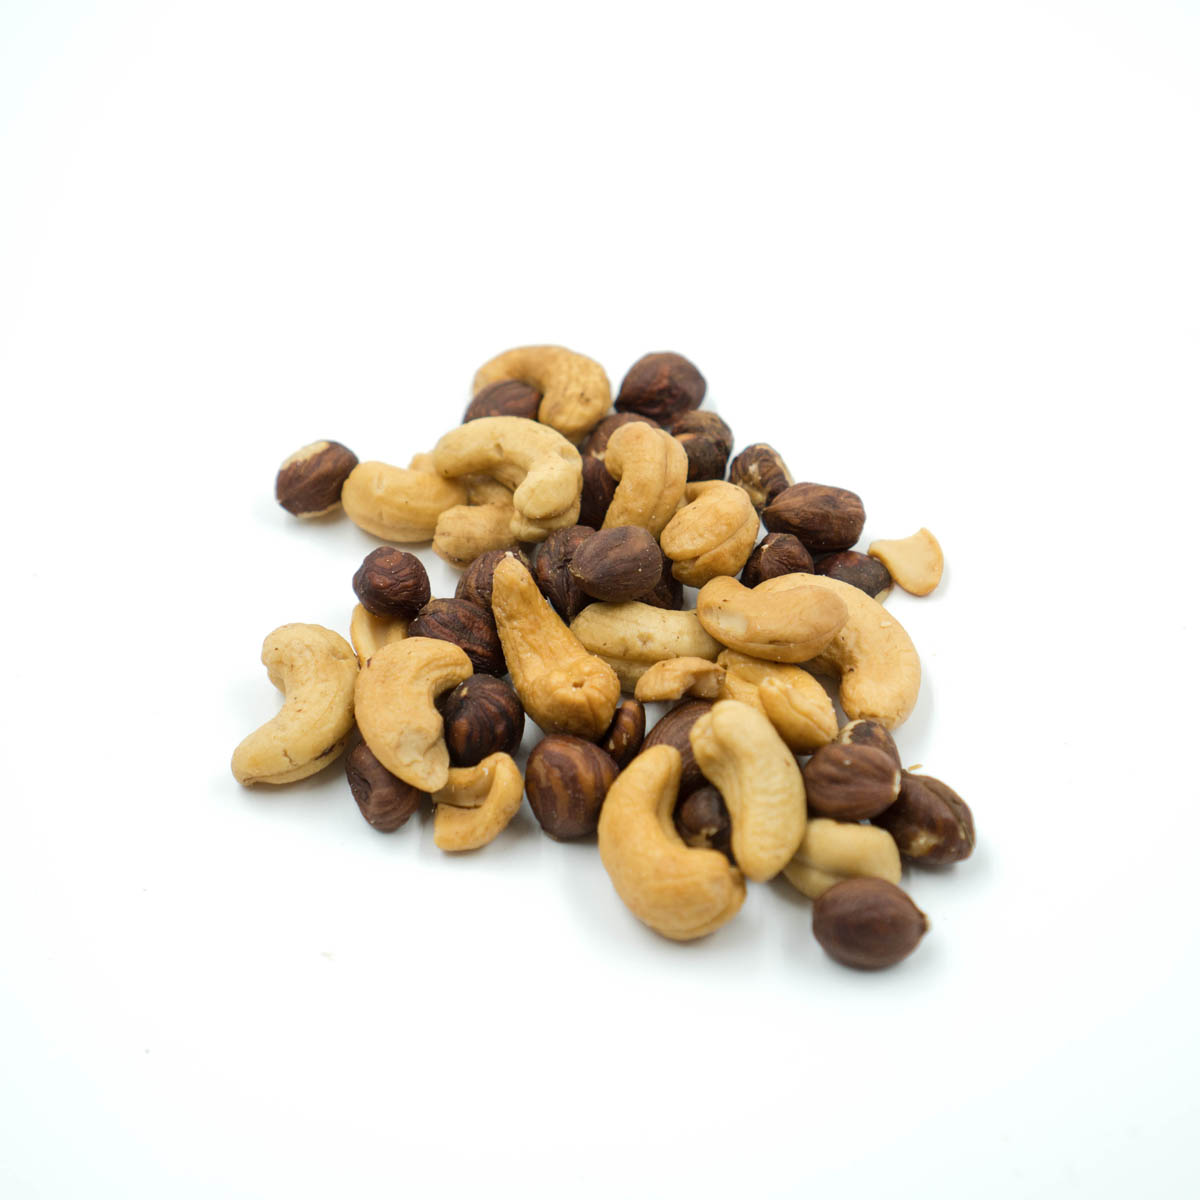 Assorted Unsalted Nut Mix